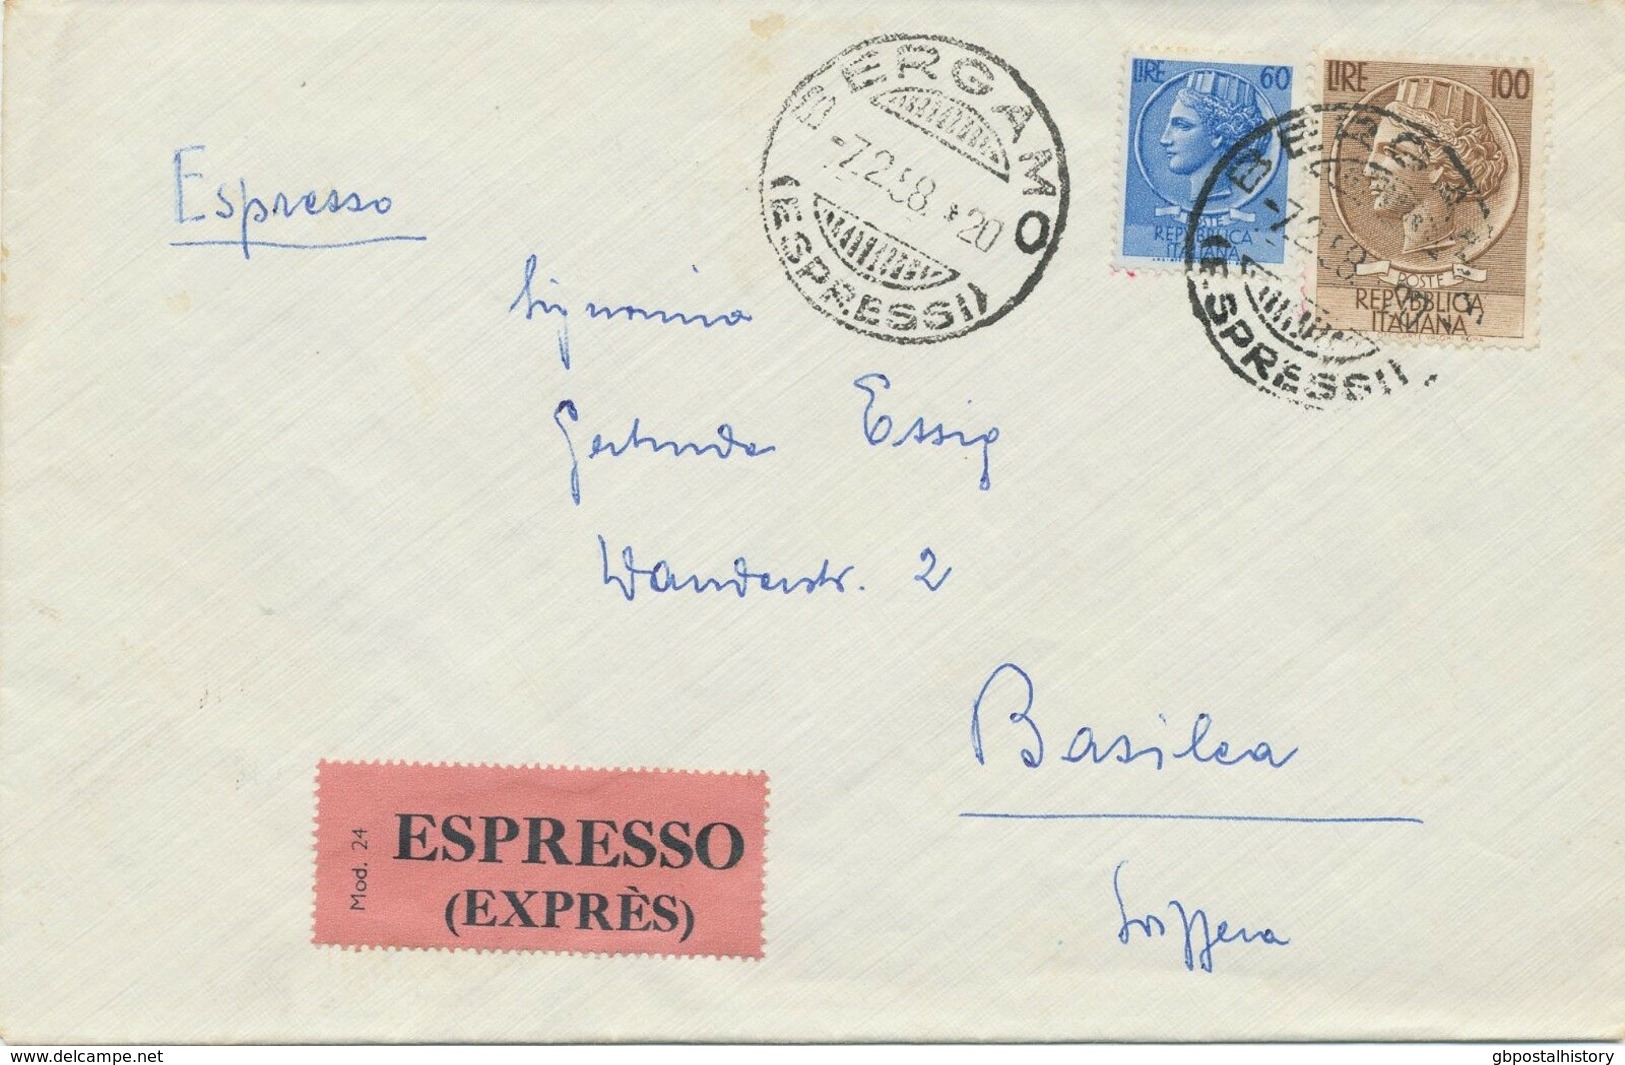 ITALY 1957/77 7 Different Superb ESPRESSO-covers (Express Covers) All Foreign - Express/pneumatic Mail